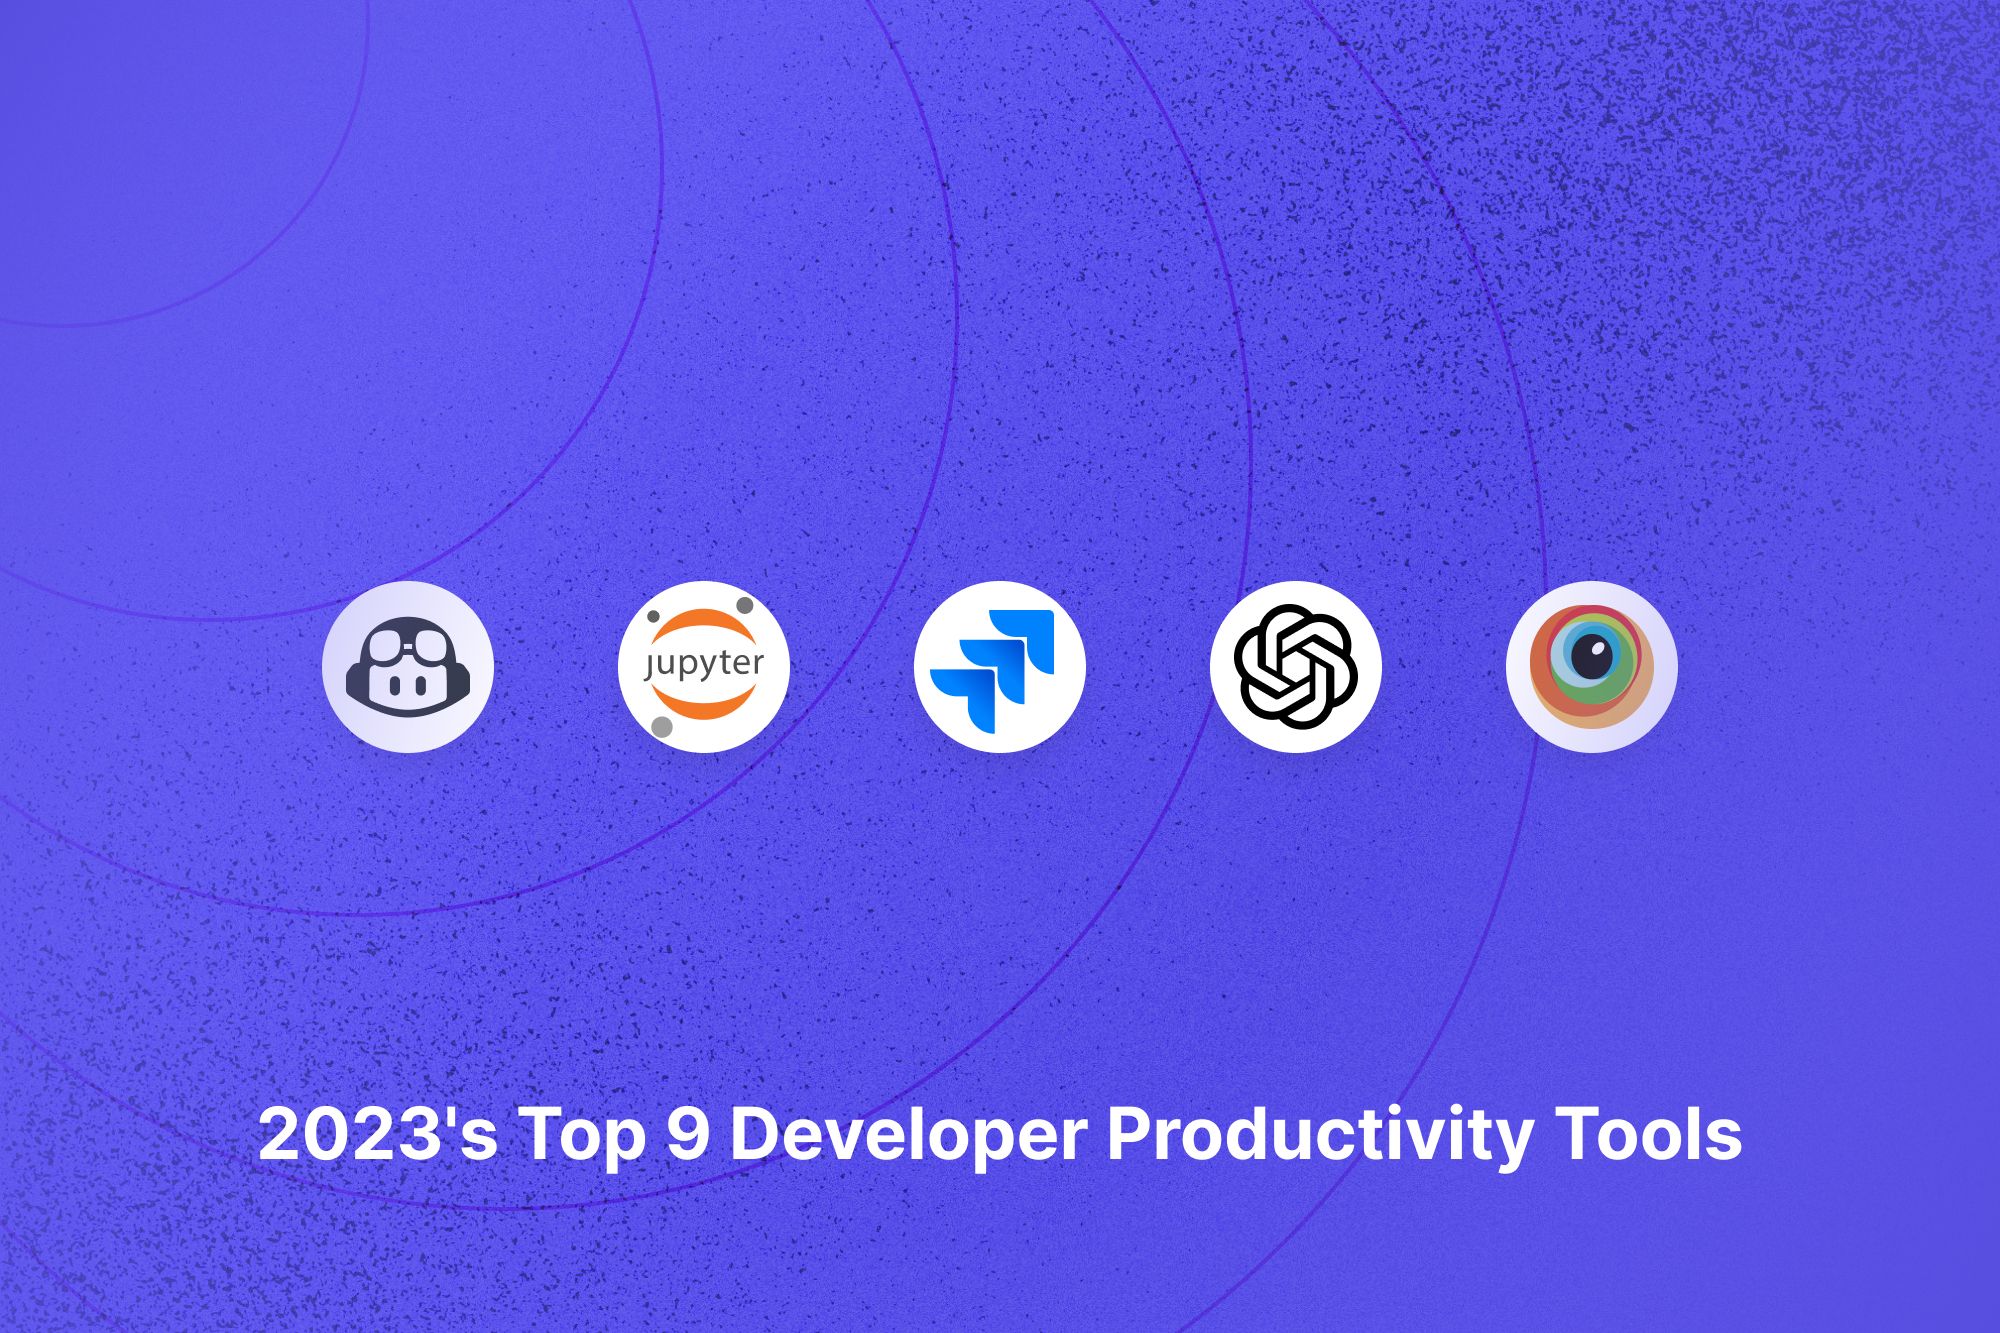 Top 9 Productivity Tools for Developers in 2023